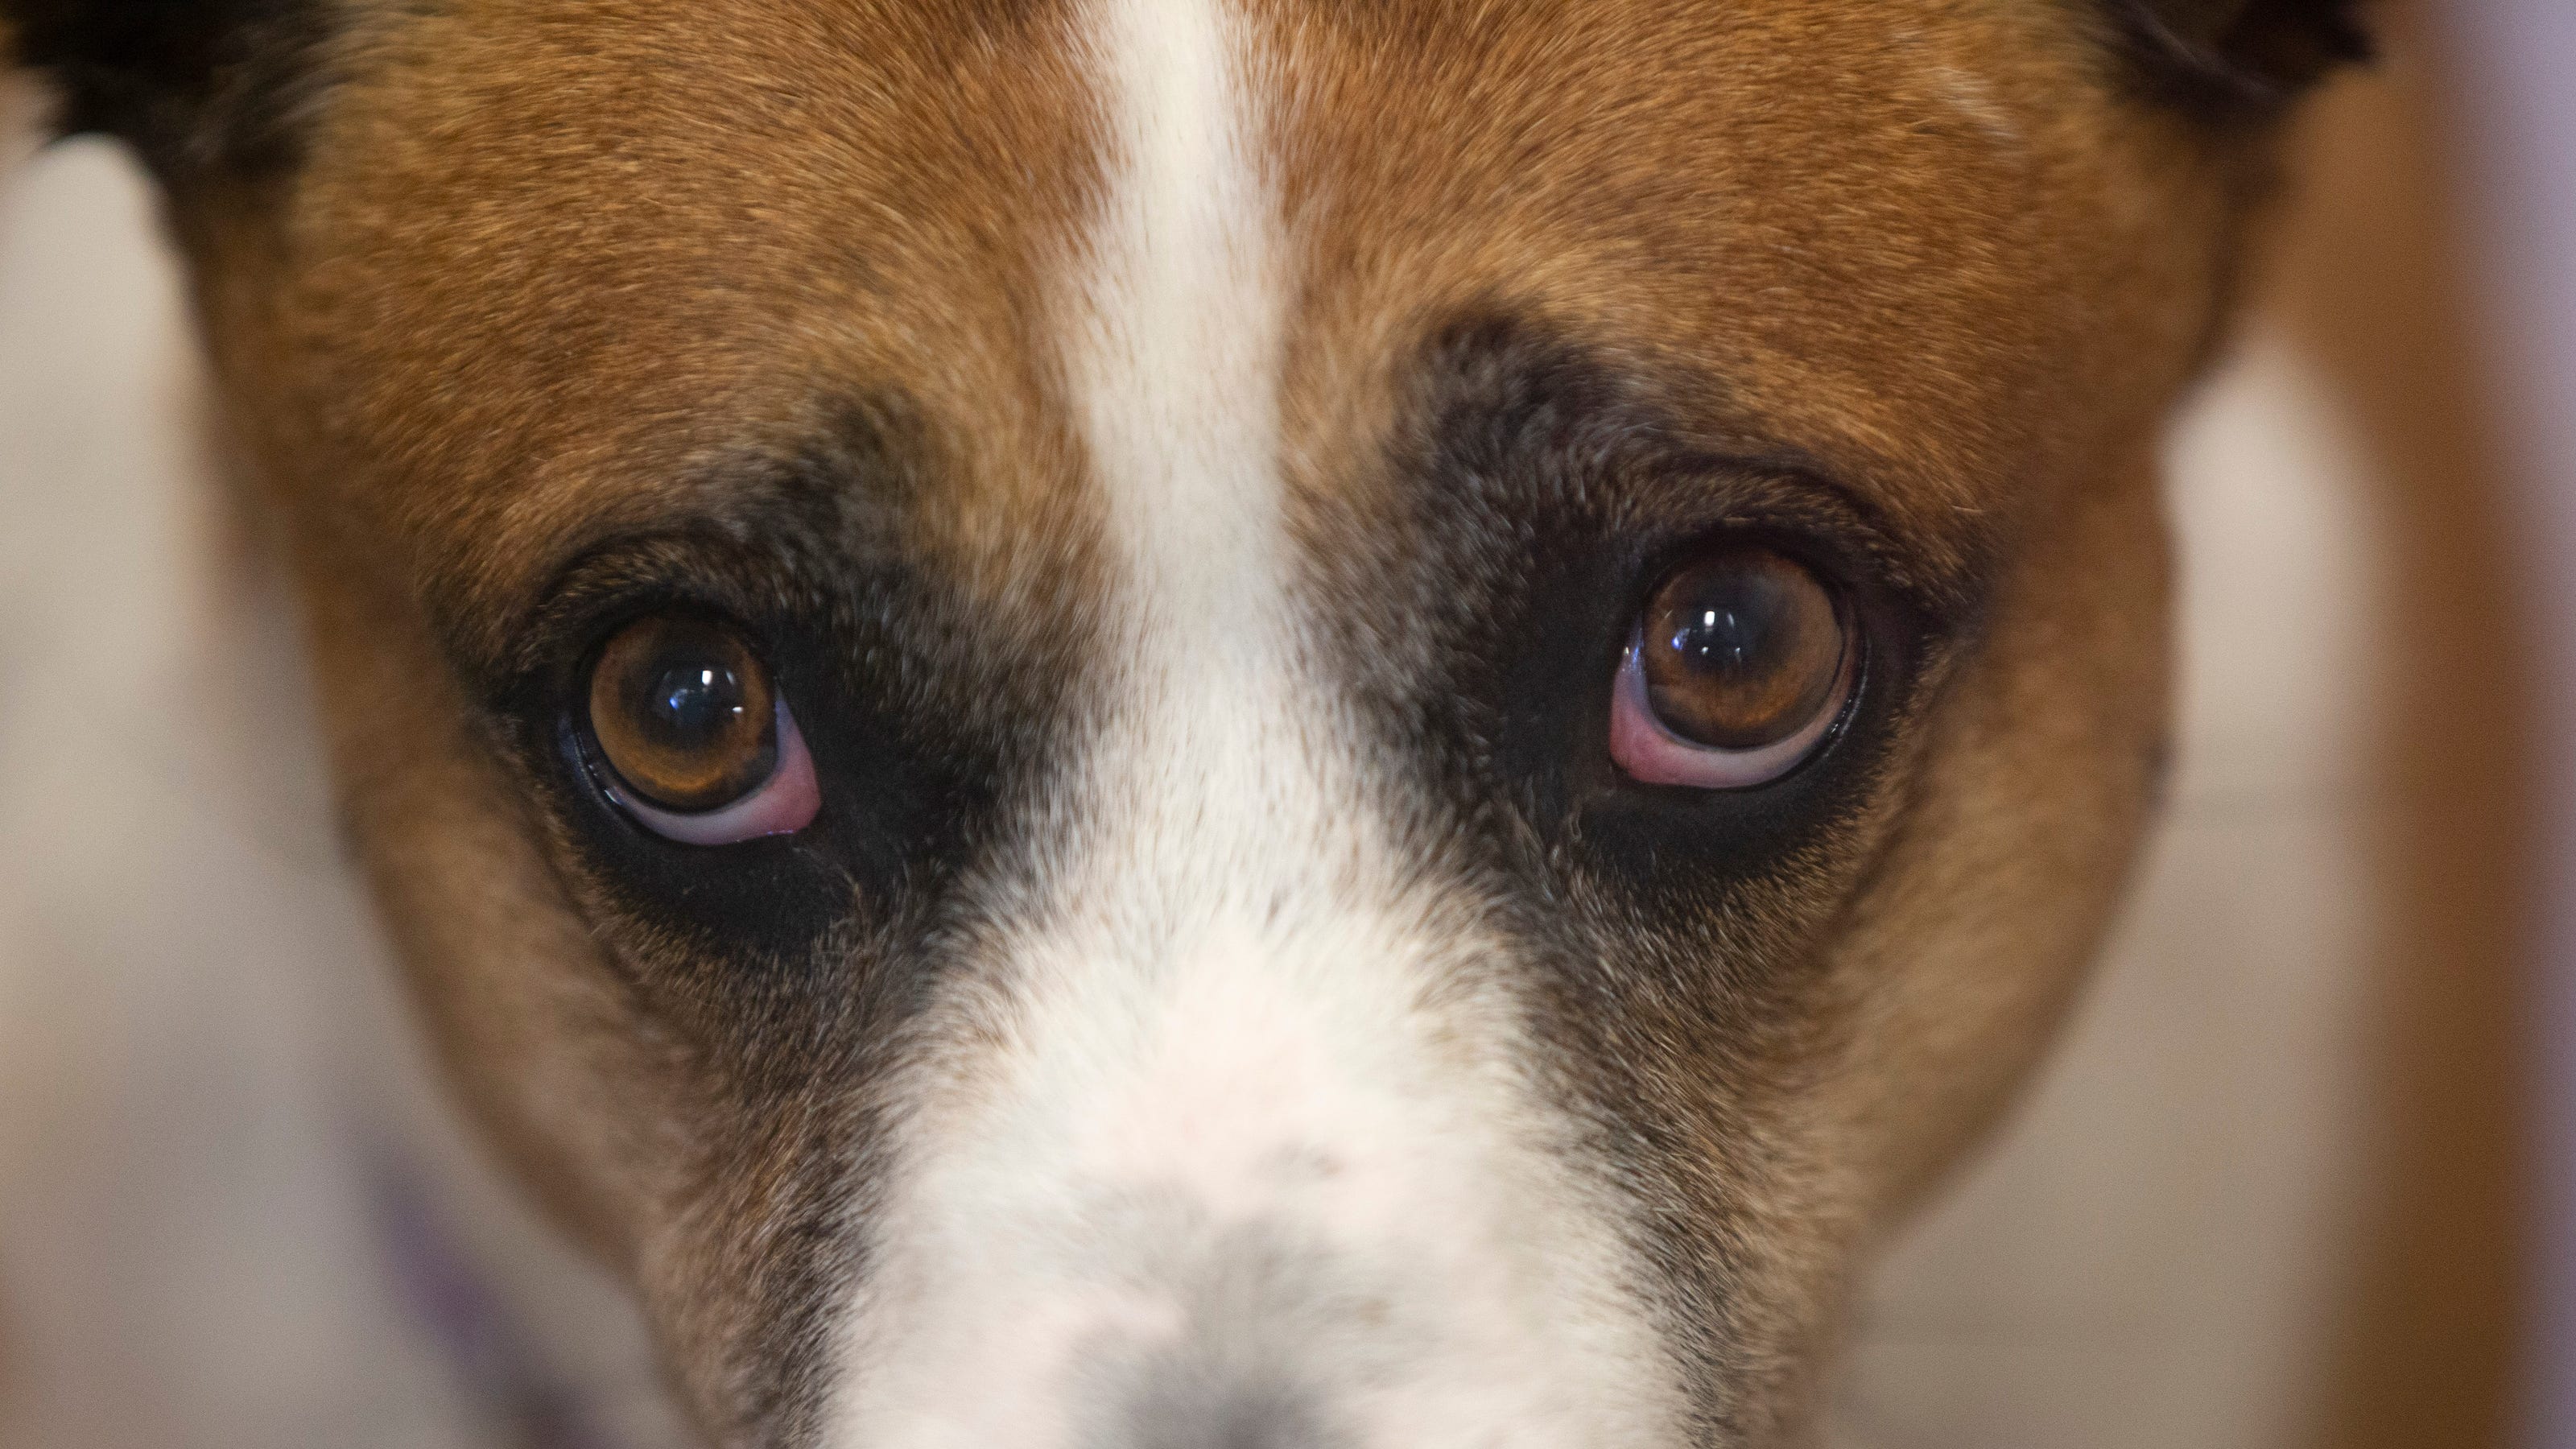 Puppy dog eyes: Dogs evolved eyebrow muscle to help bond with humans